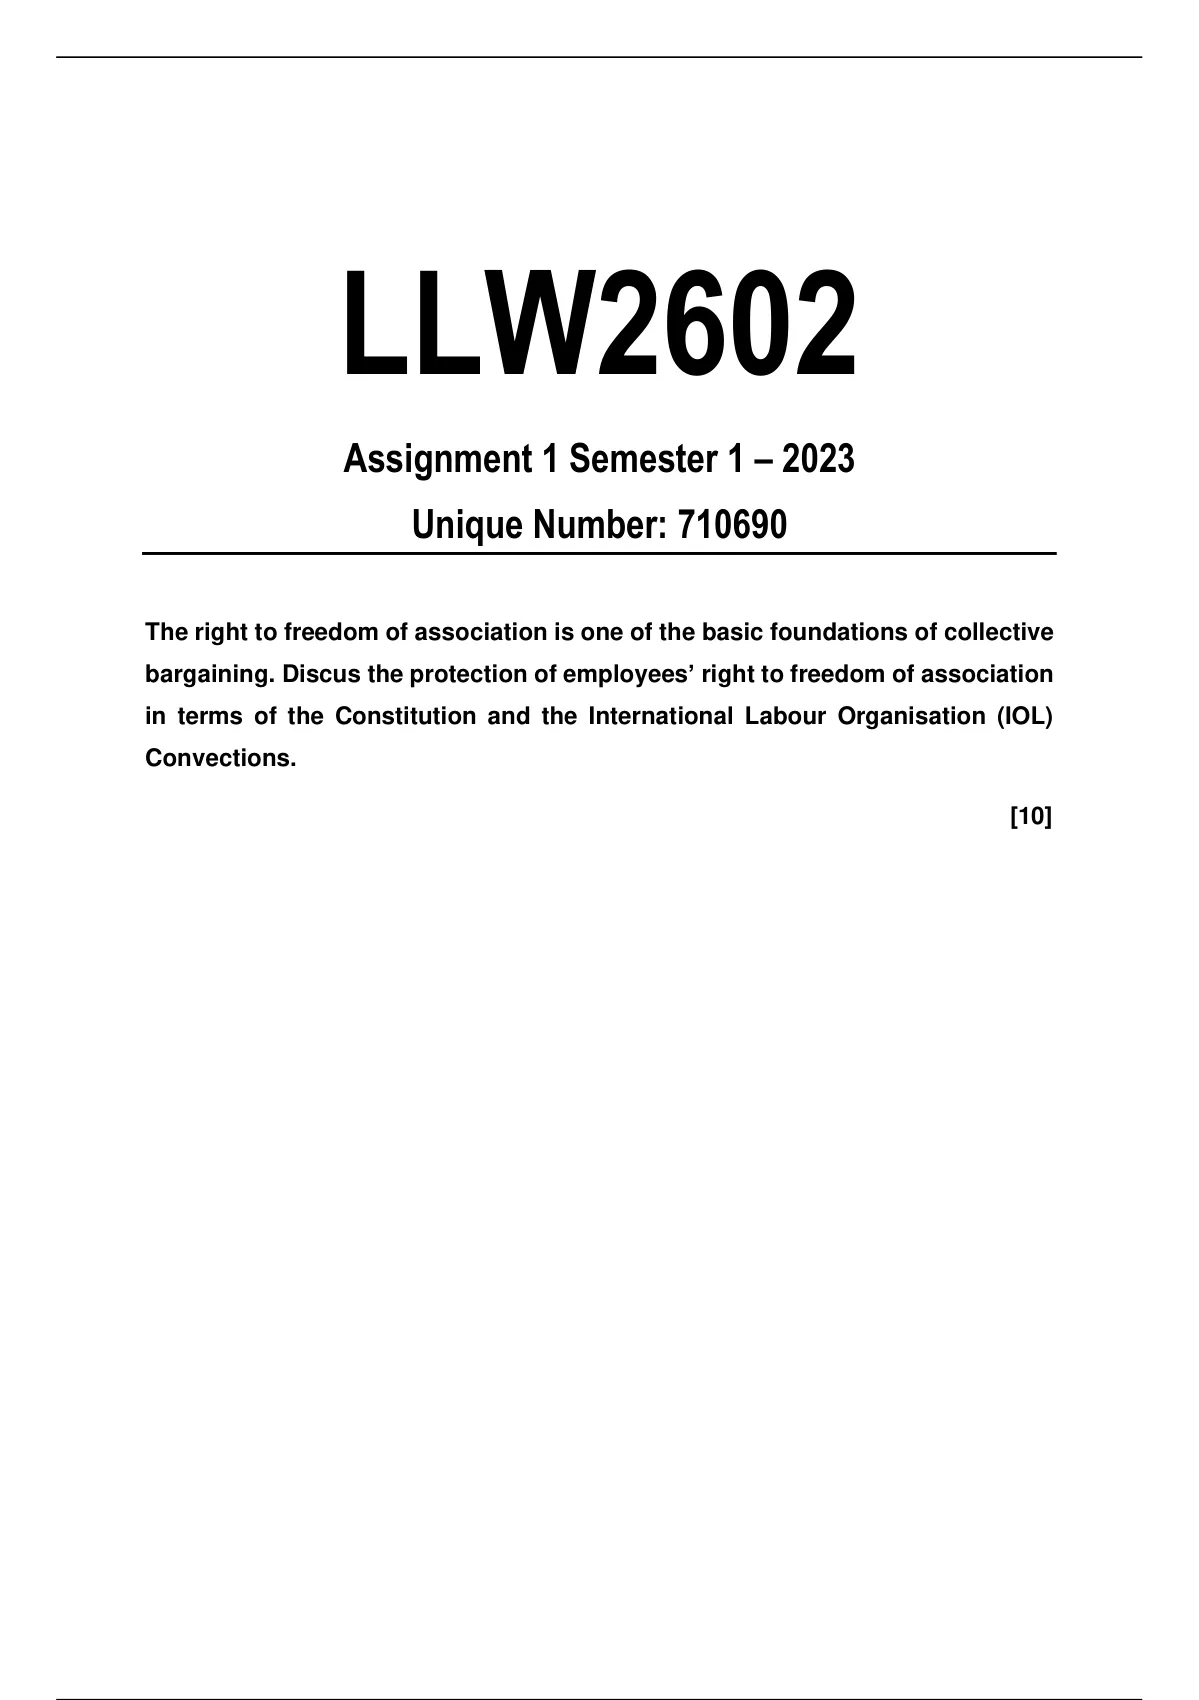 llw2602 assignment 1 answers